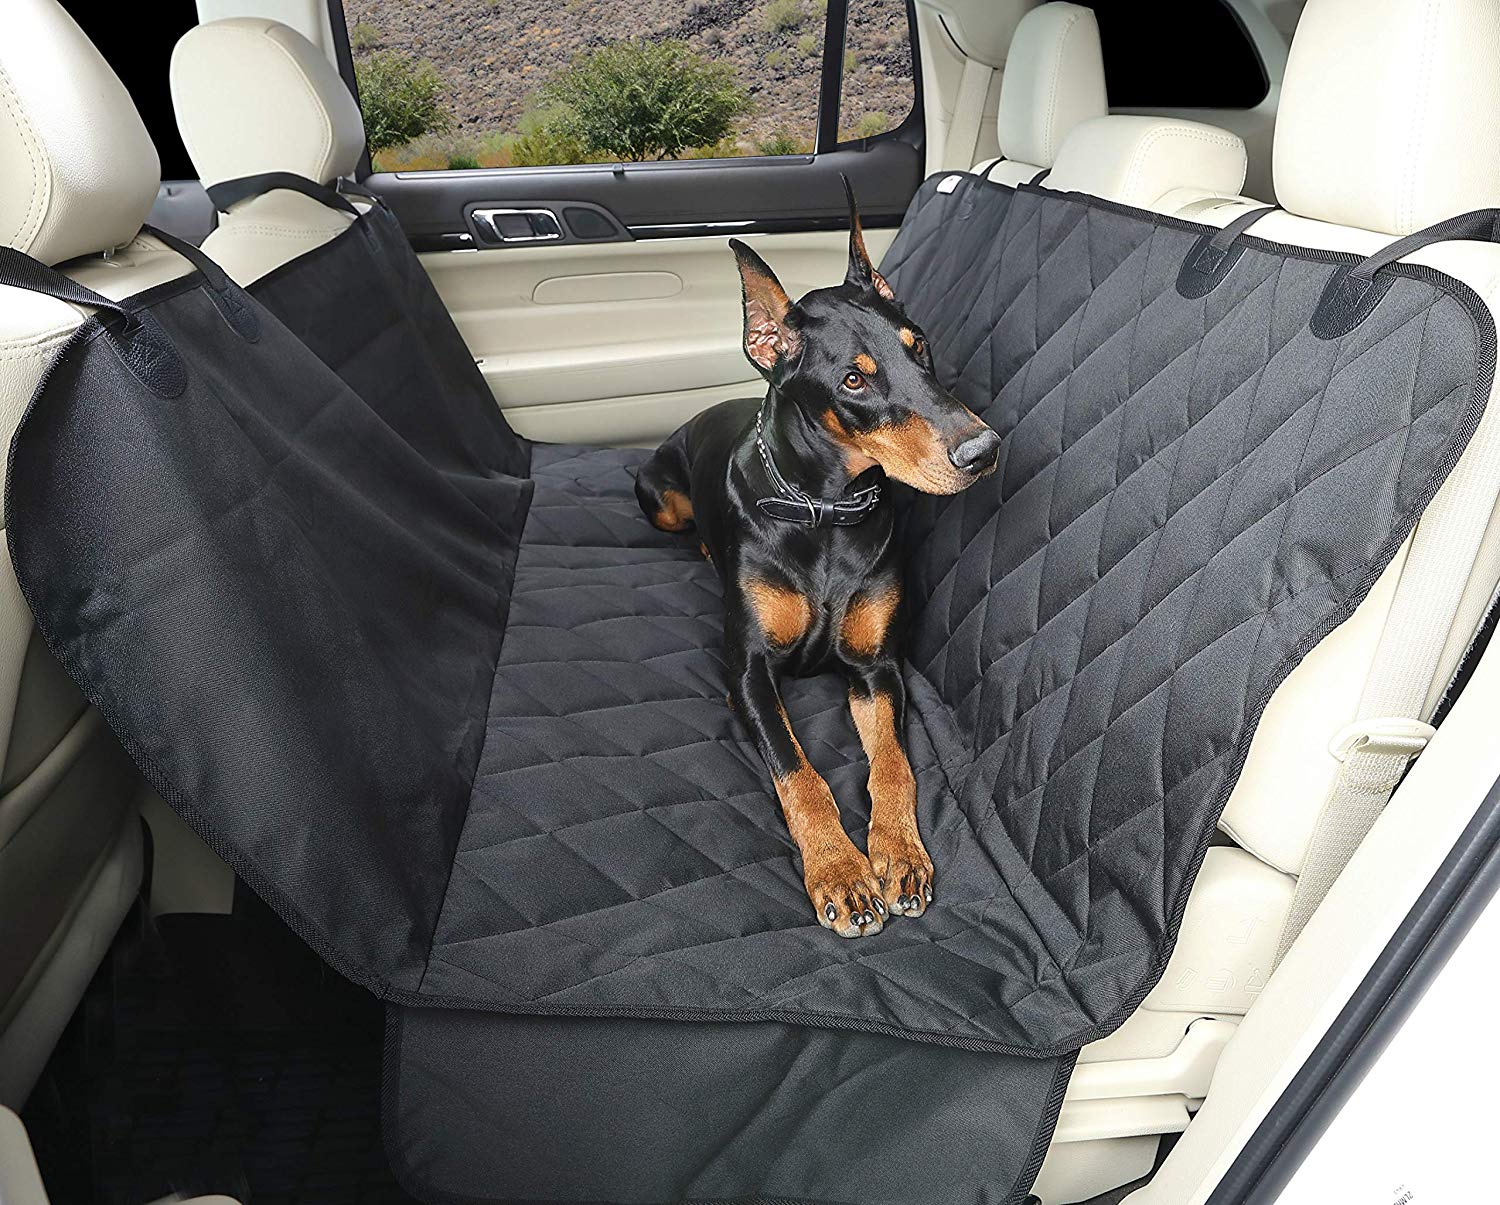 KH Pet Products Vehicle Door Protector Tan 19" x 27" Protects your car doors